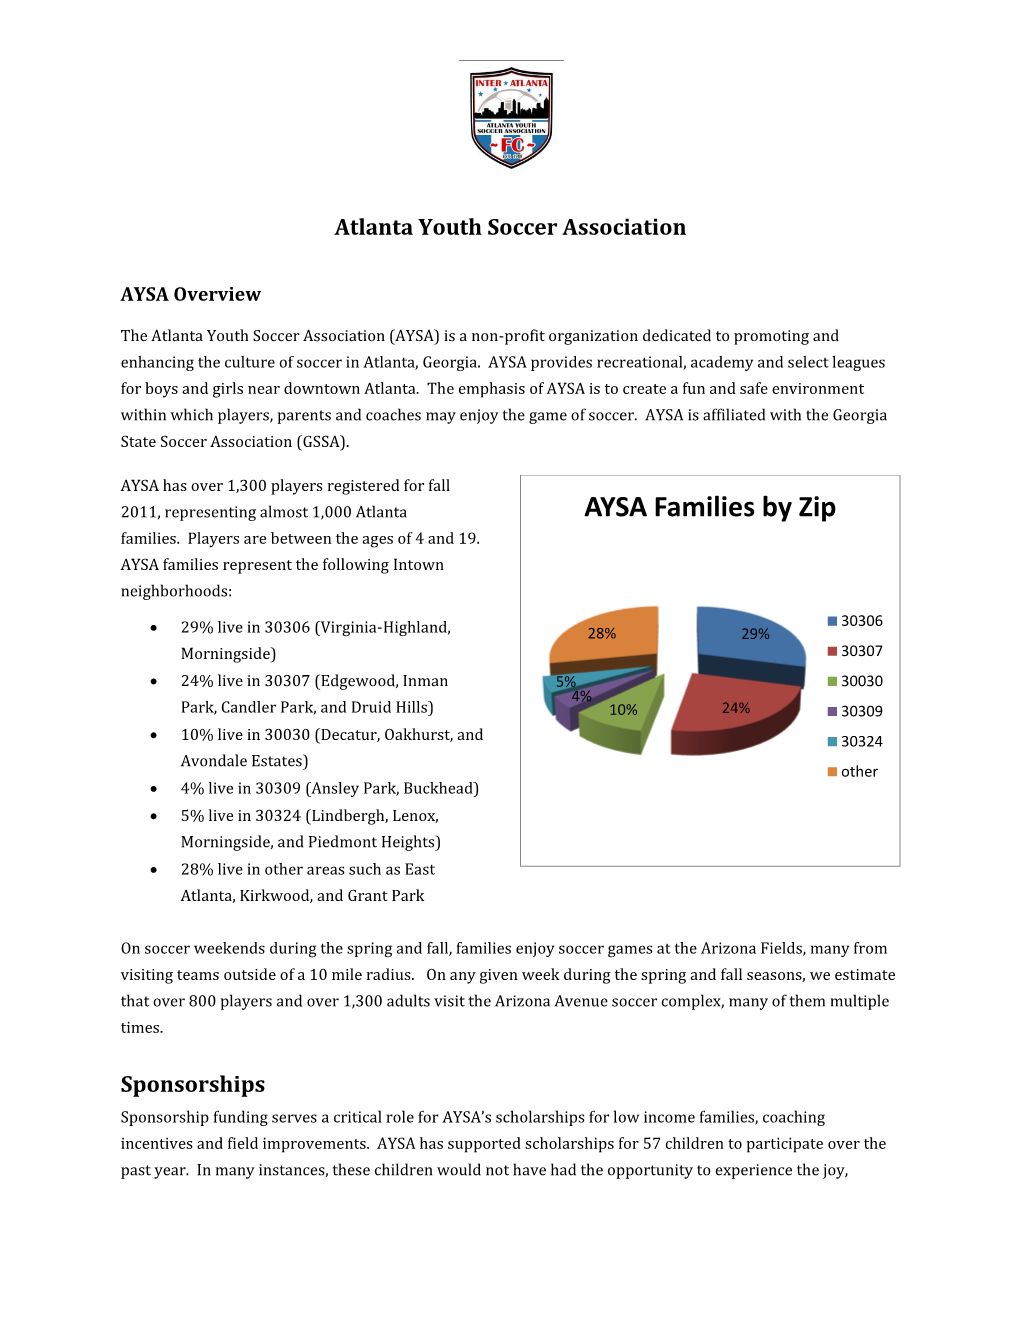 AYSA Families by Zip Families